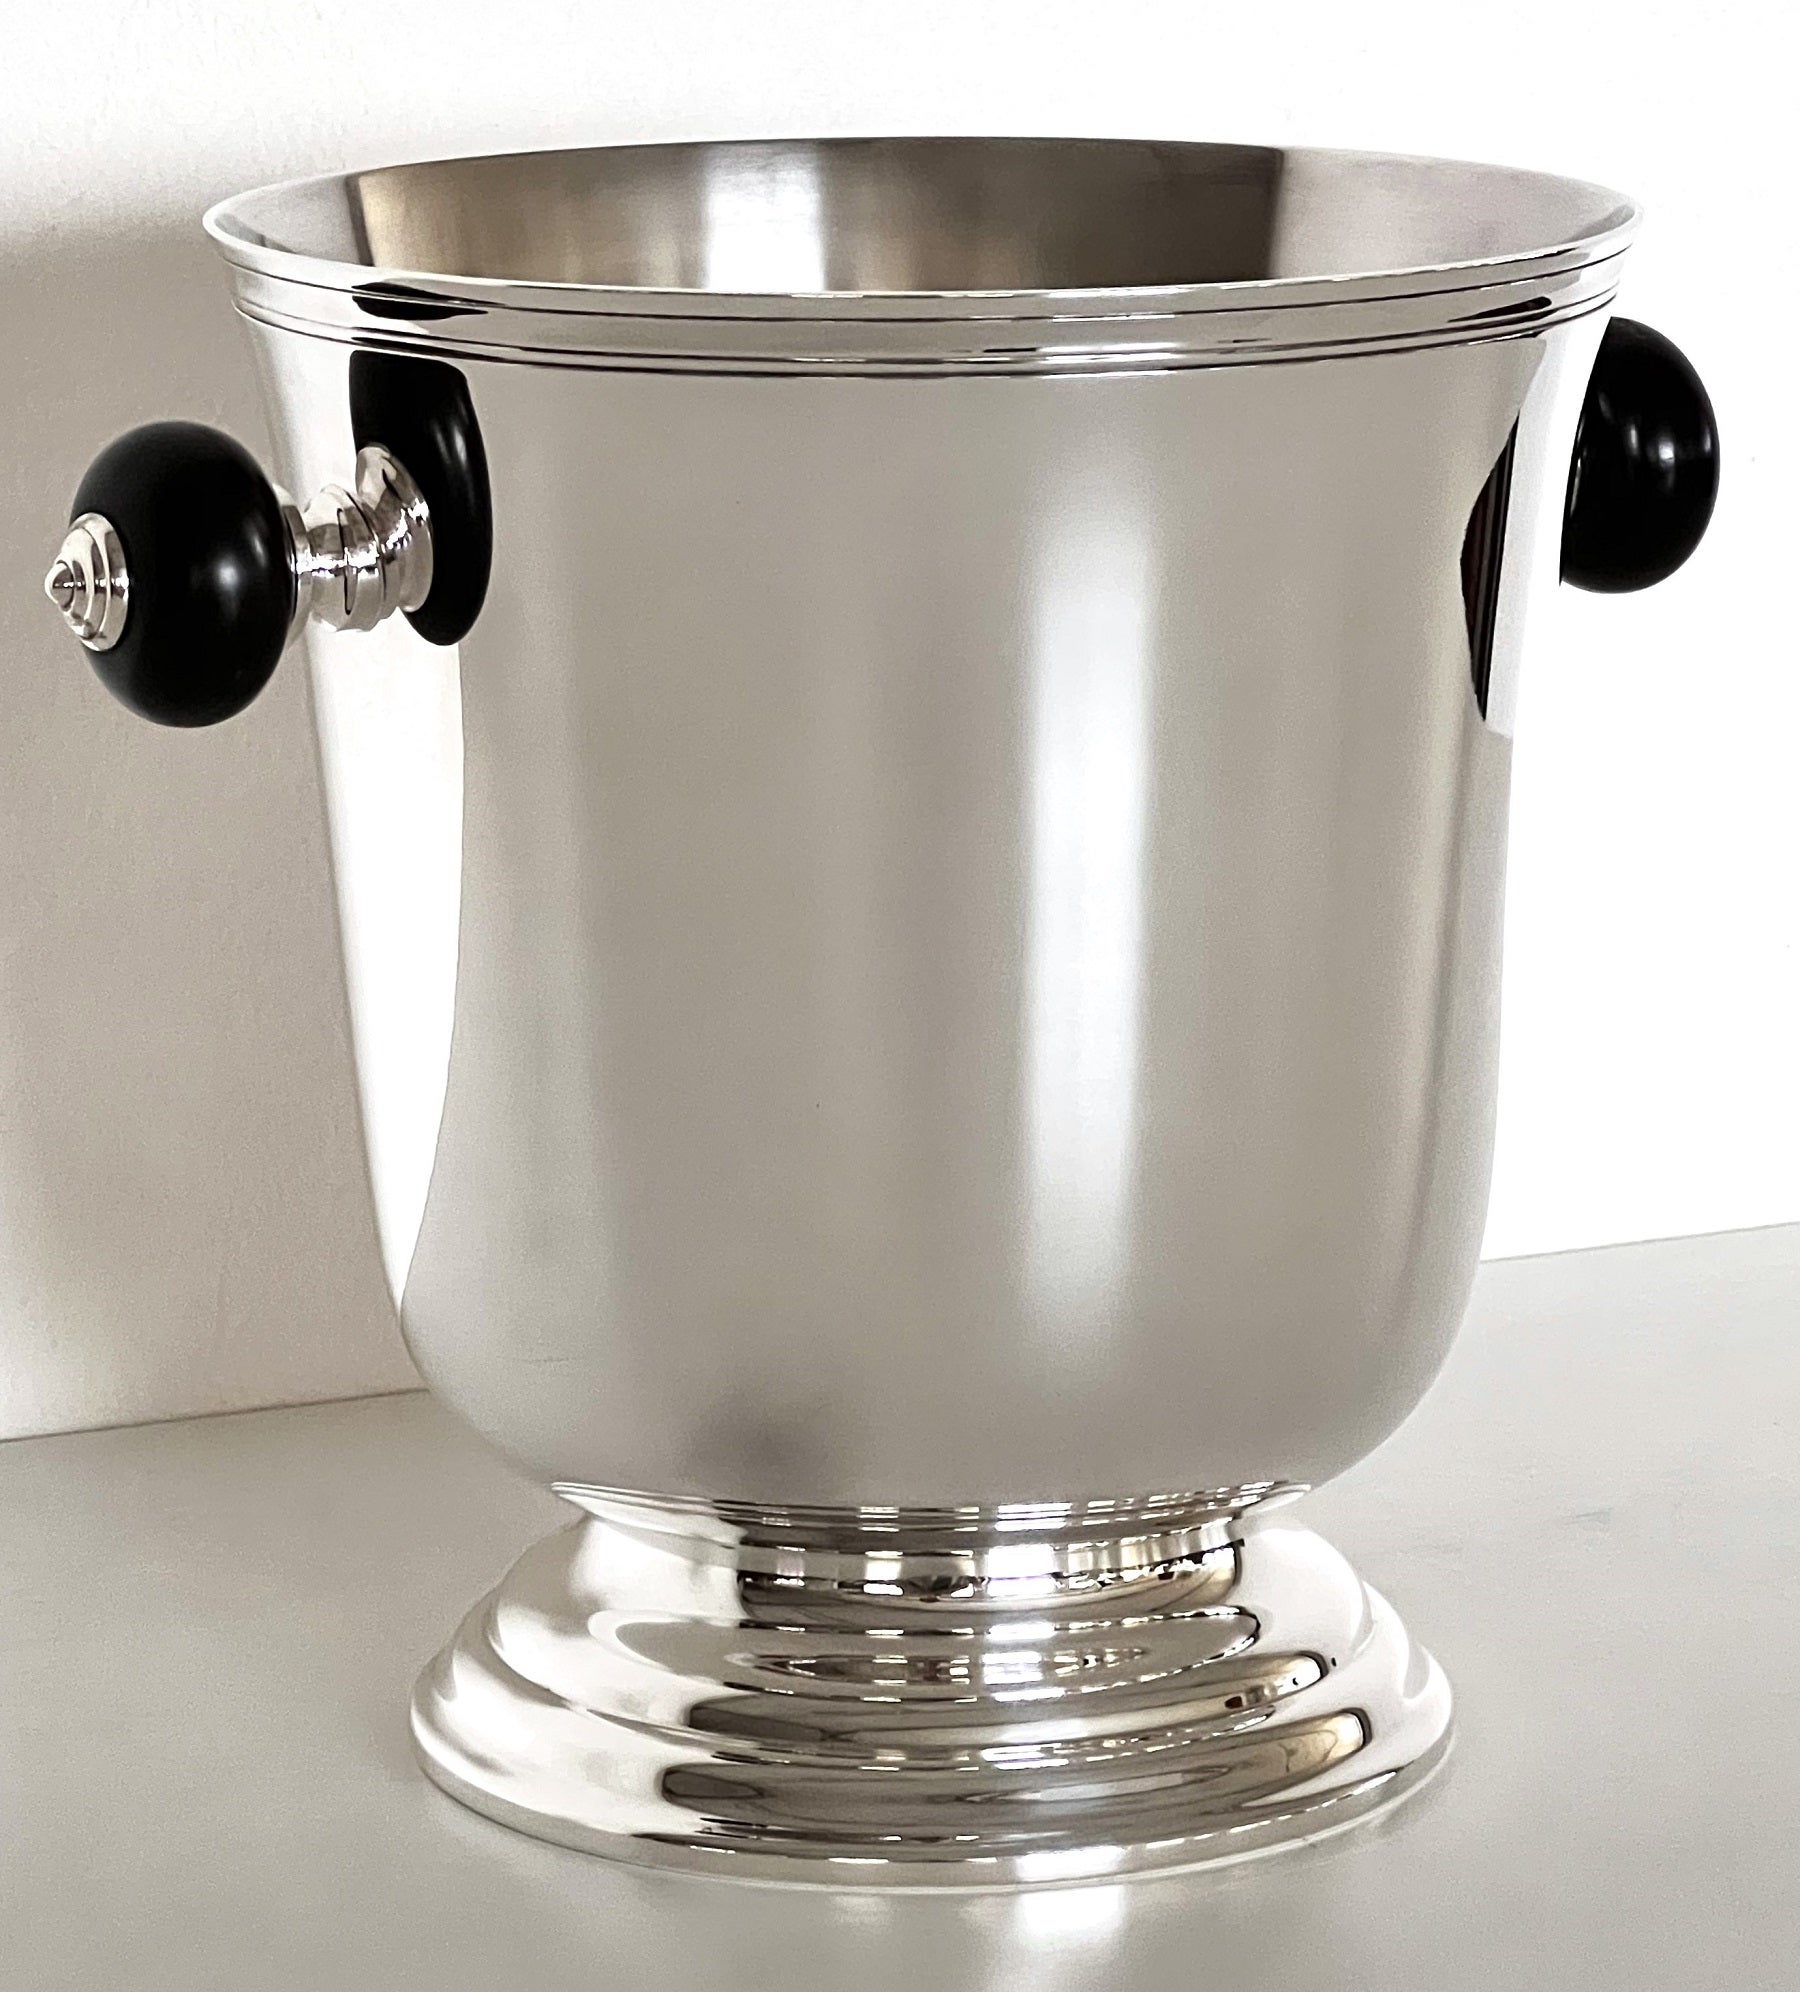 Gorgeous and very shiny, classic and timeless French Christofle silver plated champagne bucket or wine cooler; it's a stunning piece to keep forever.
The bucket is silver-plated, with ebony handles ( even printed 